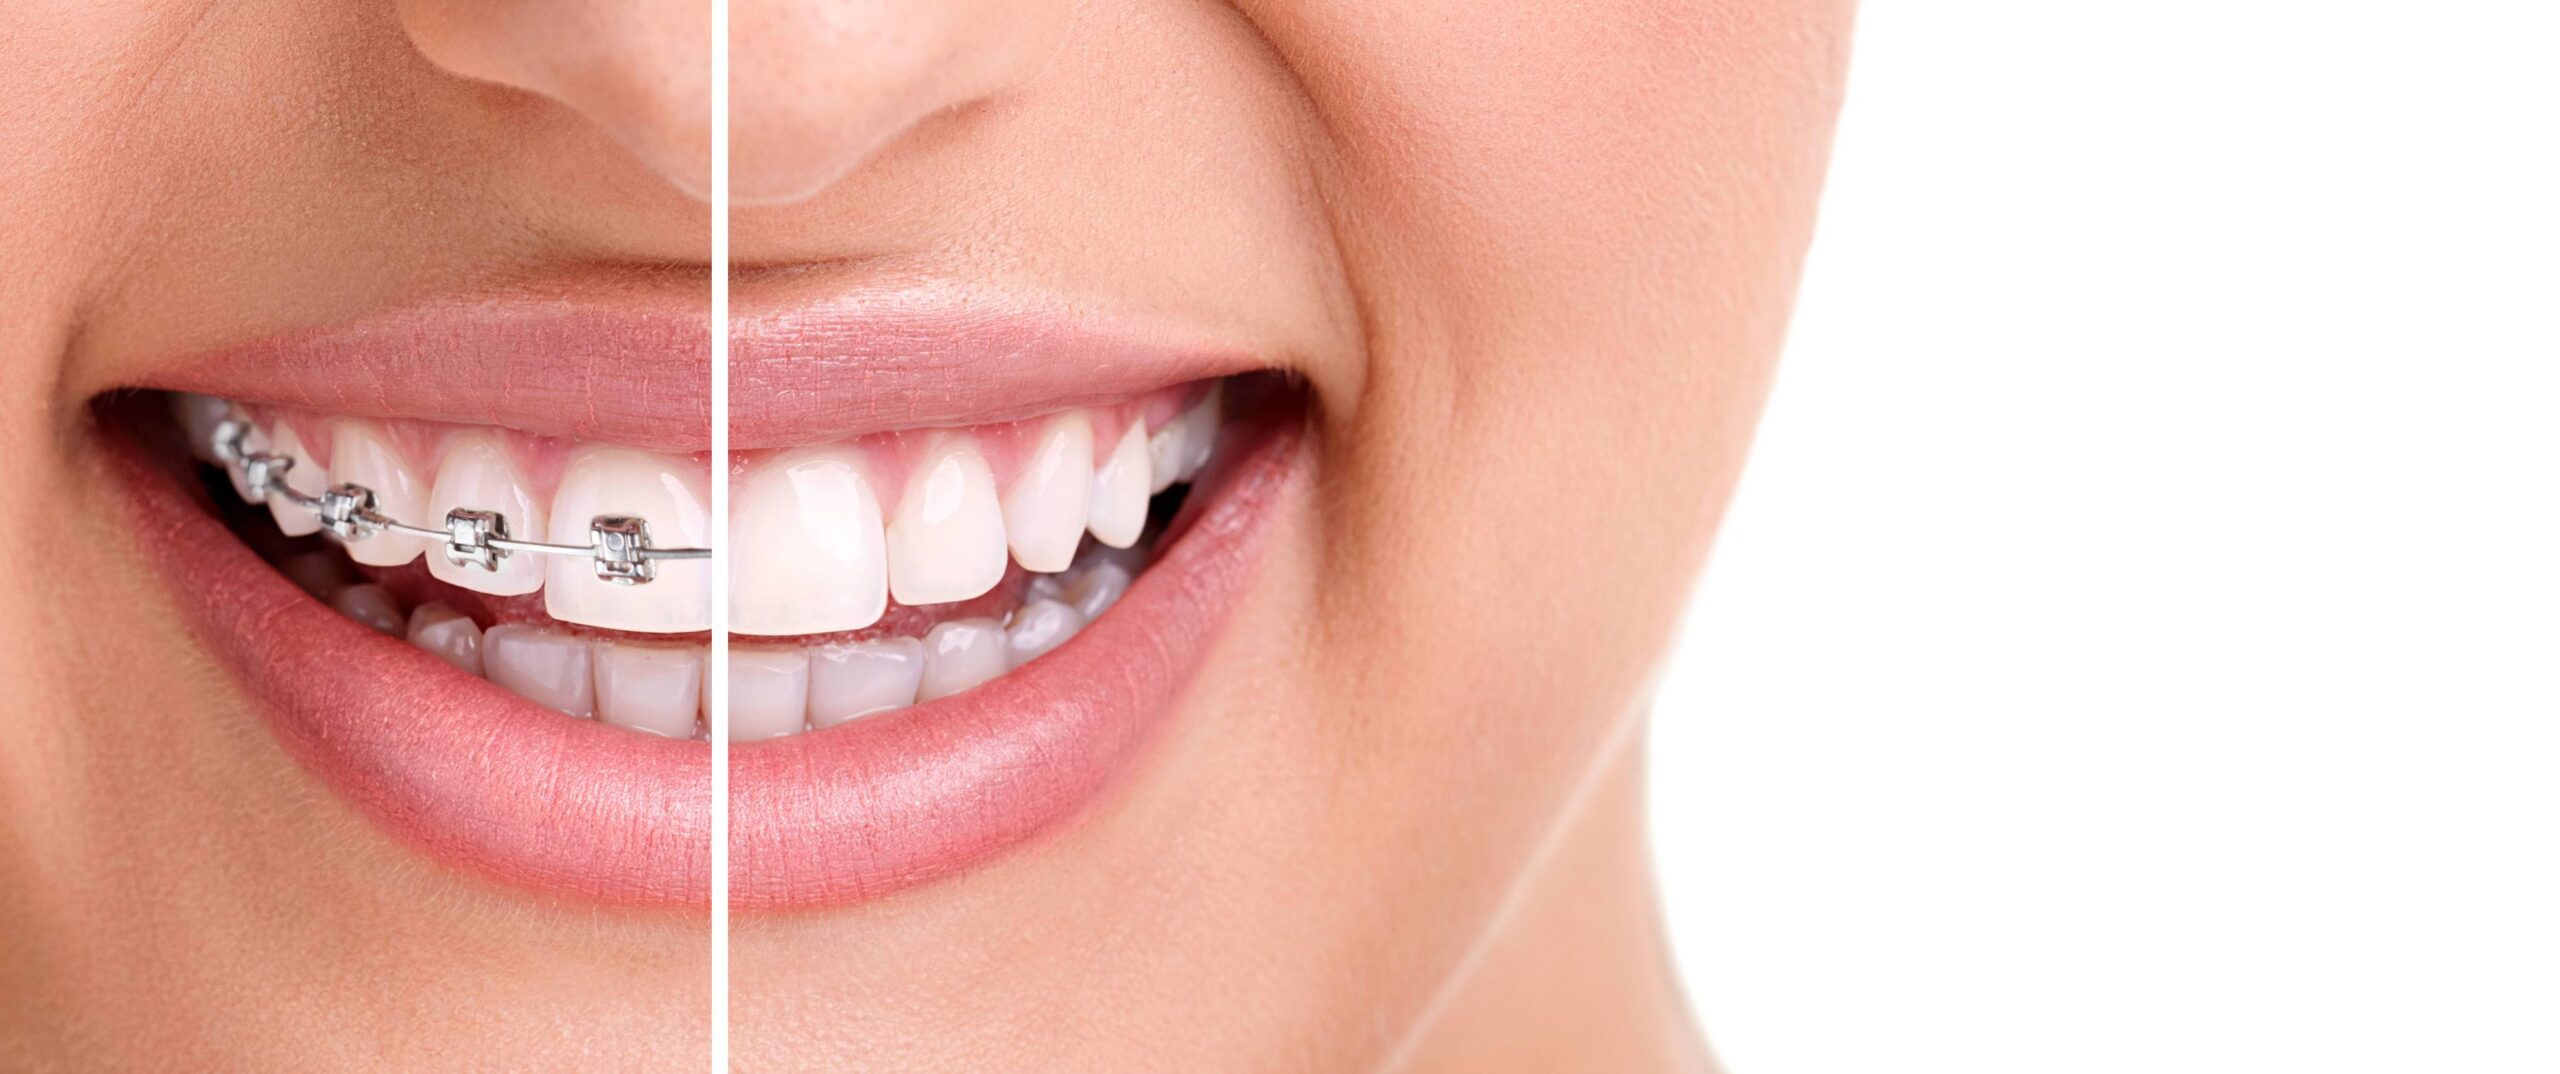 5 Tips For Improving The Results Of Your Orthodontic Treatment